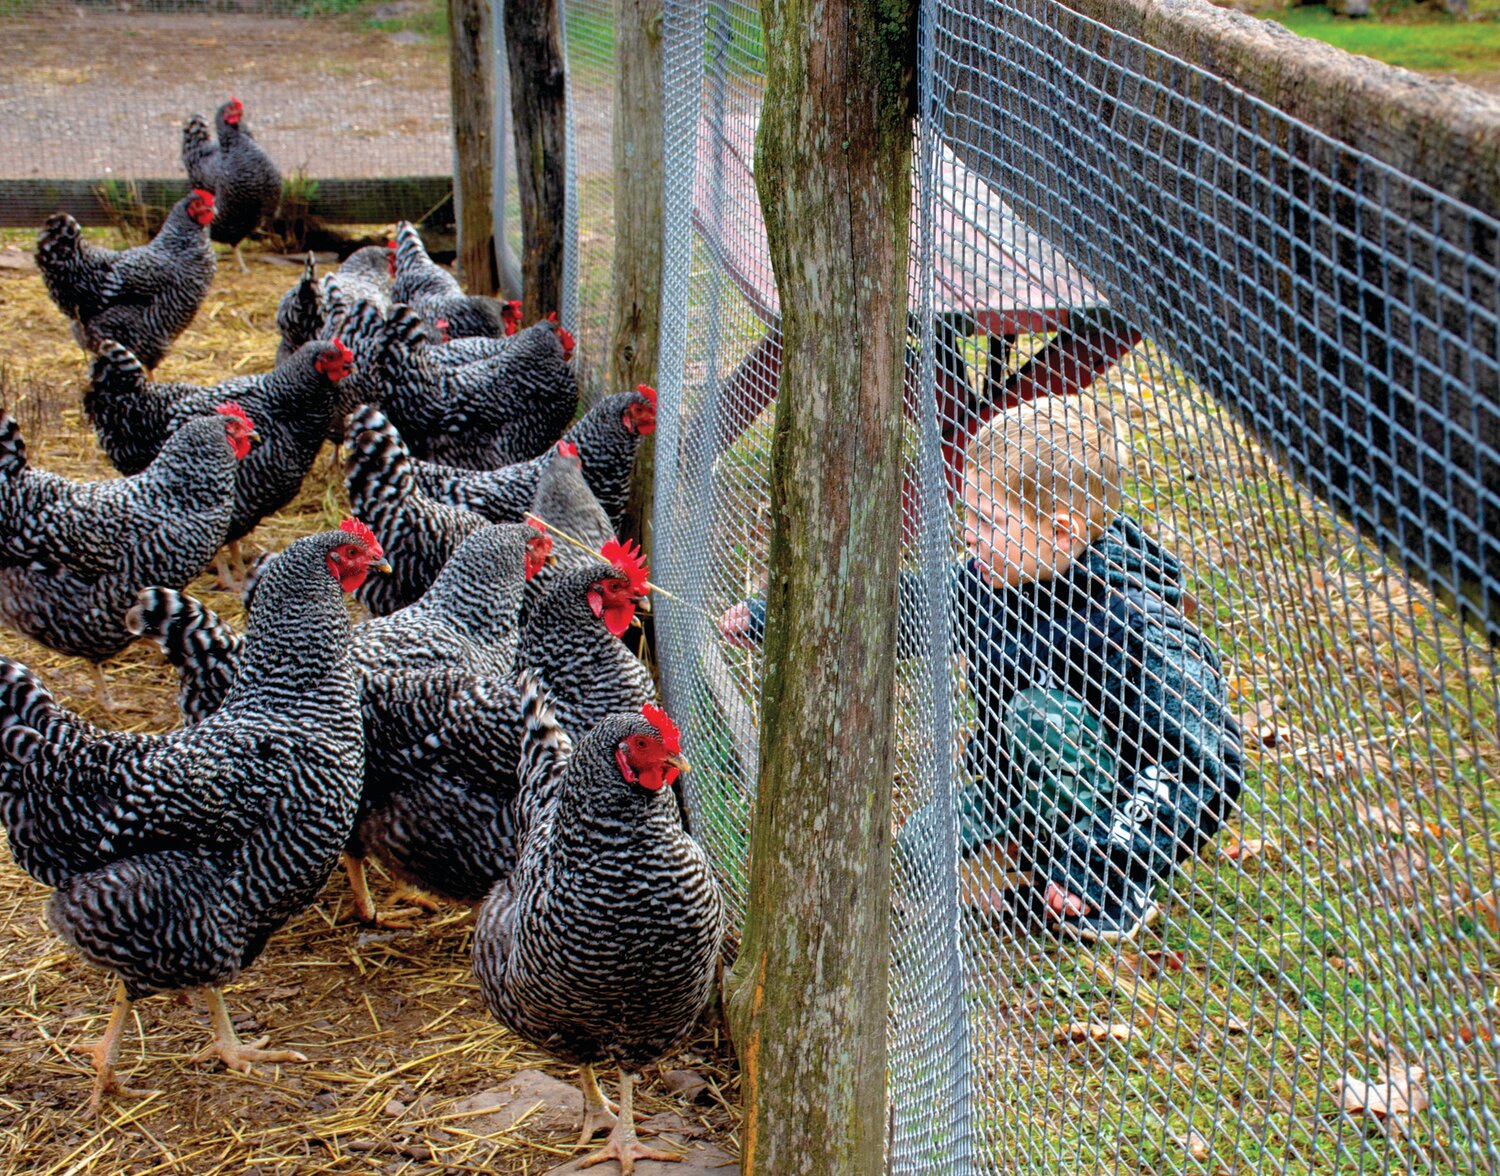 A child visits the chickens at Howell Living History Farm.